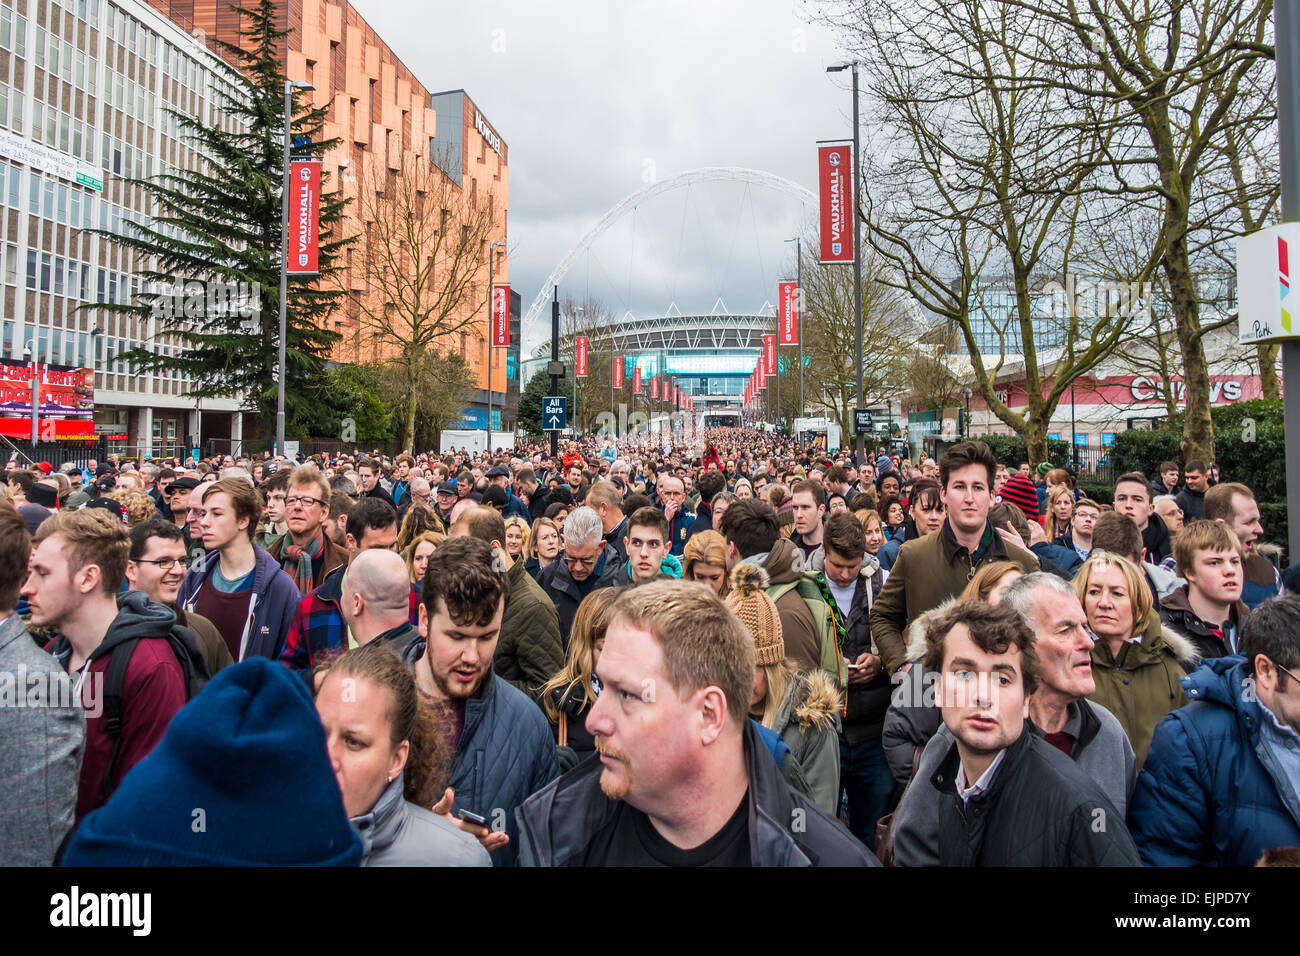 Large crowd leaving Wembley Stadium after Rugby Game. London Stock Photo